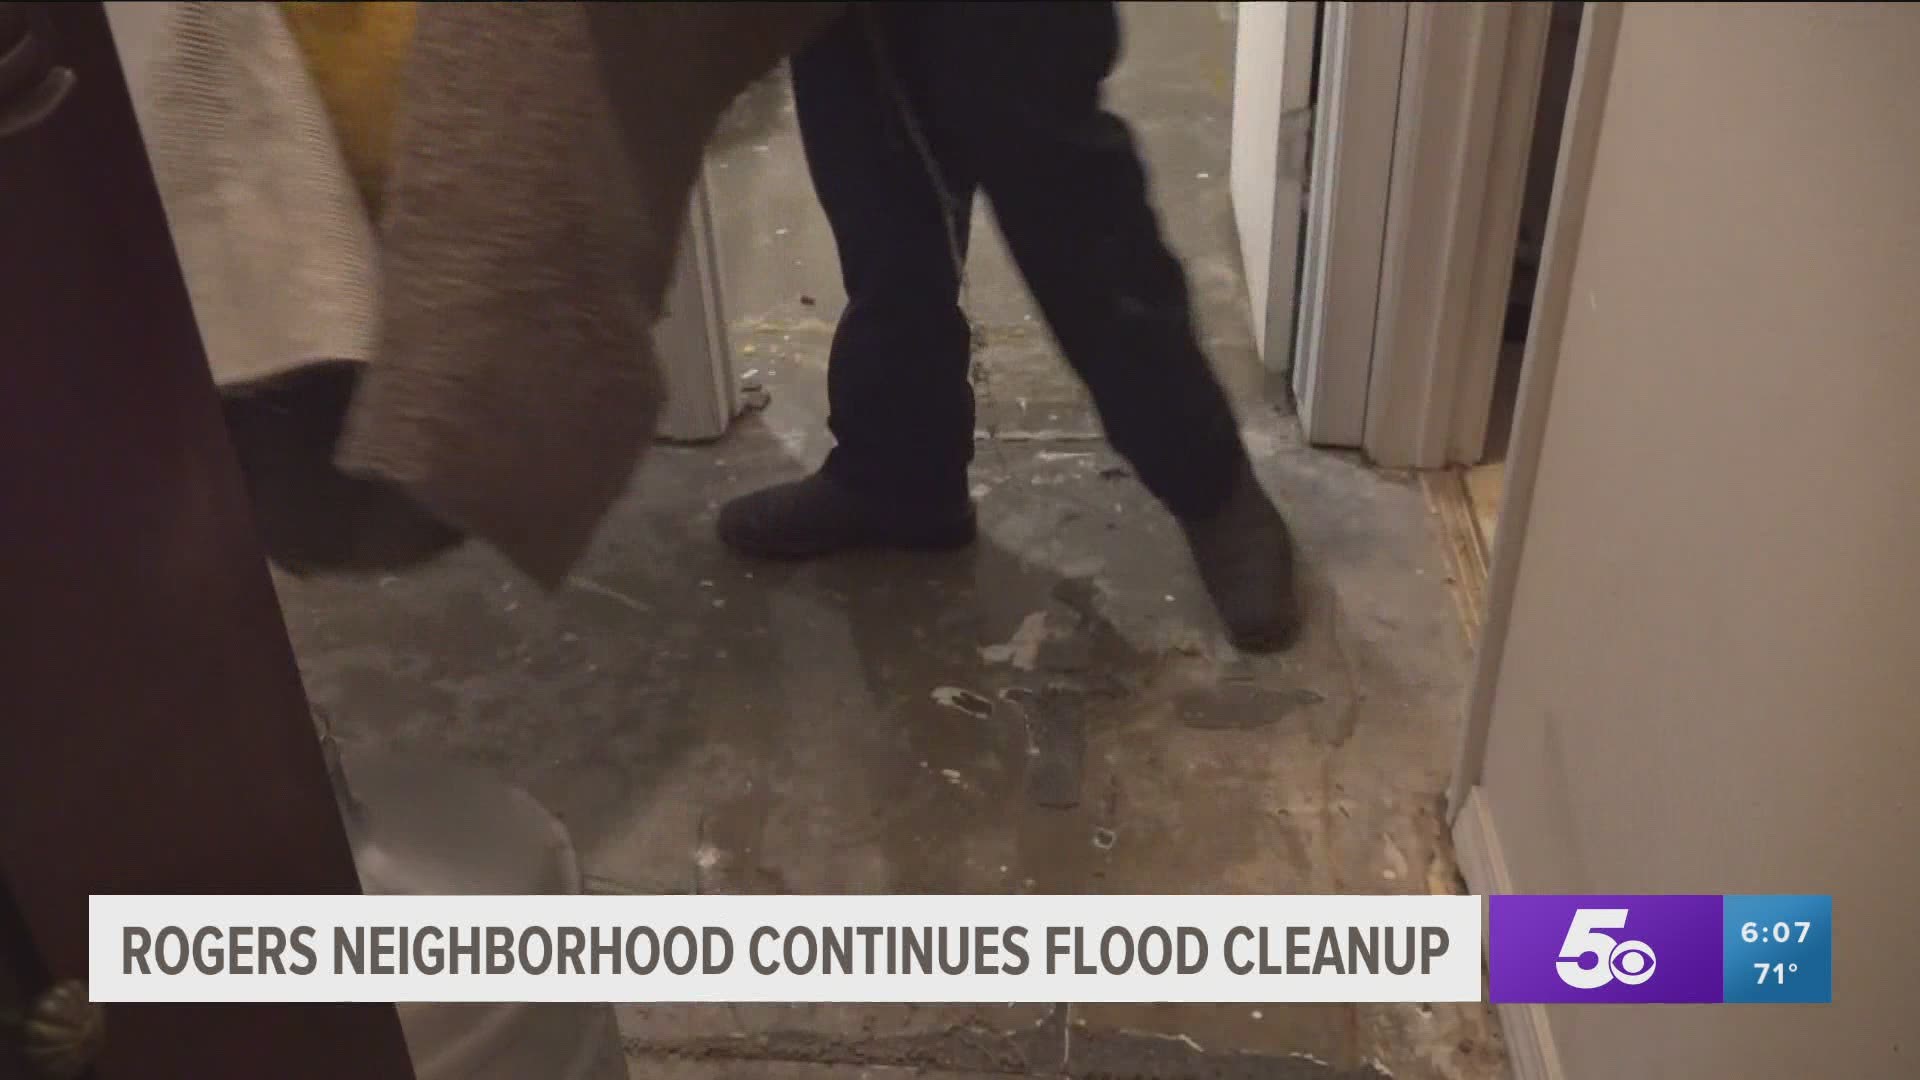 Some residents say ankle-deep water flooded their homes.